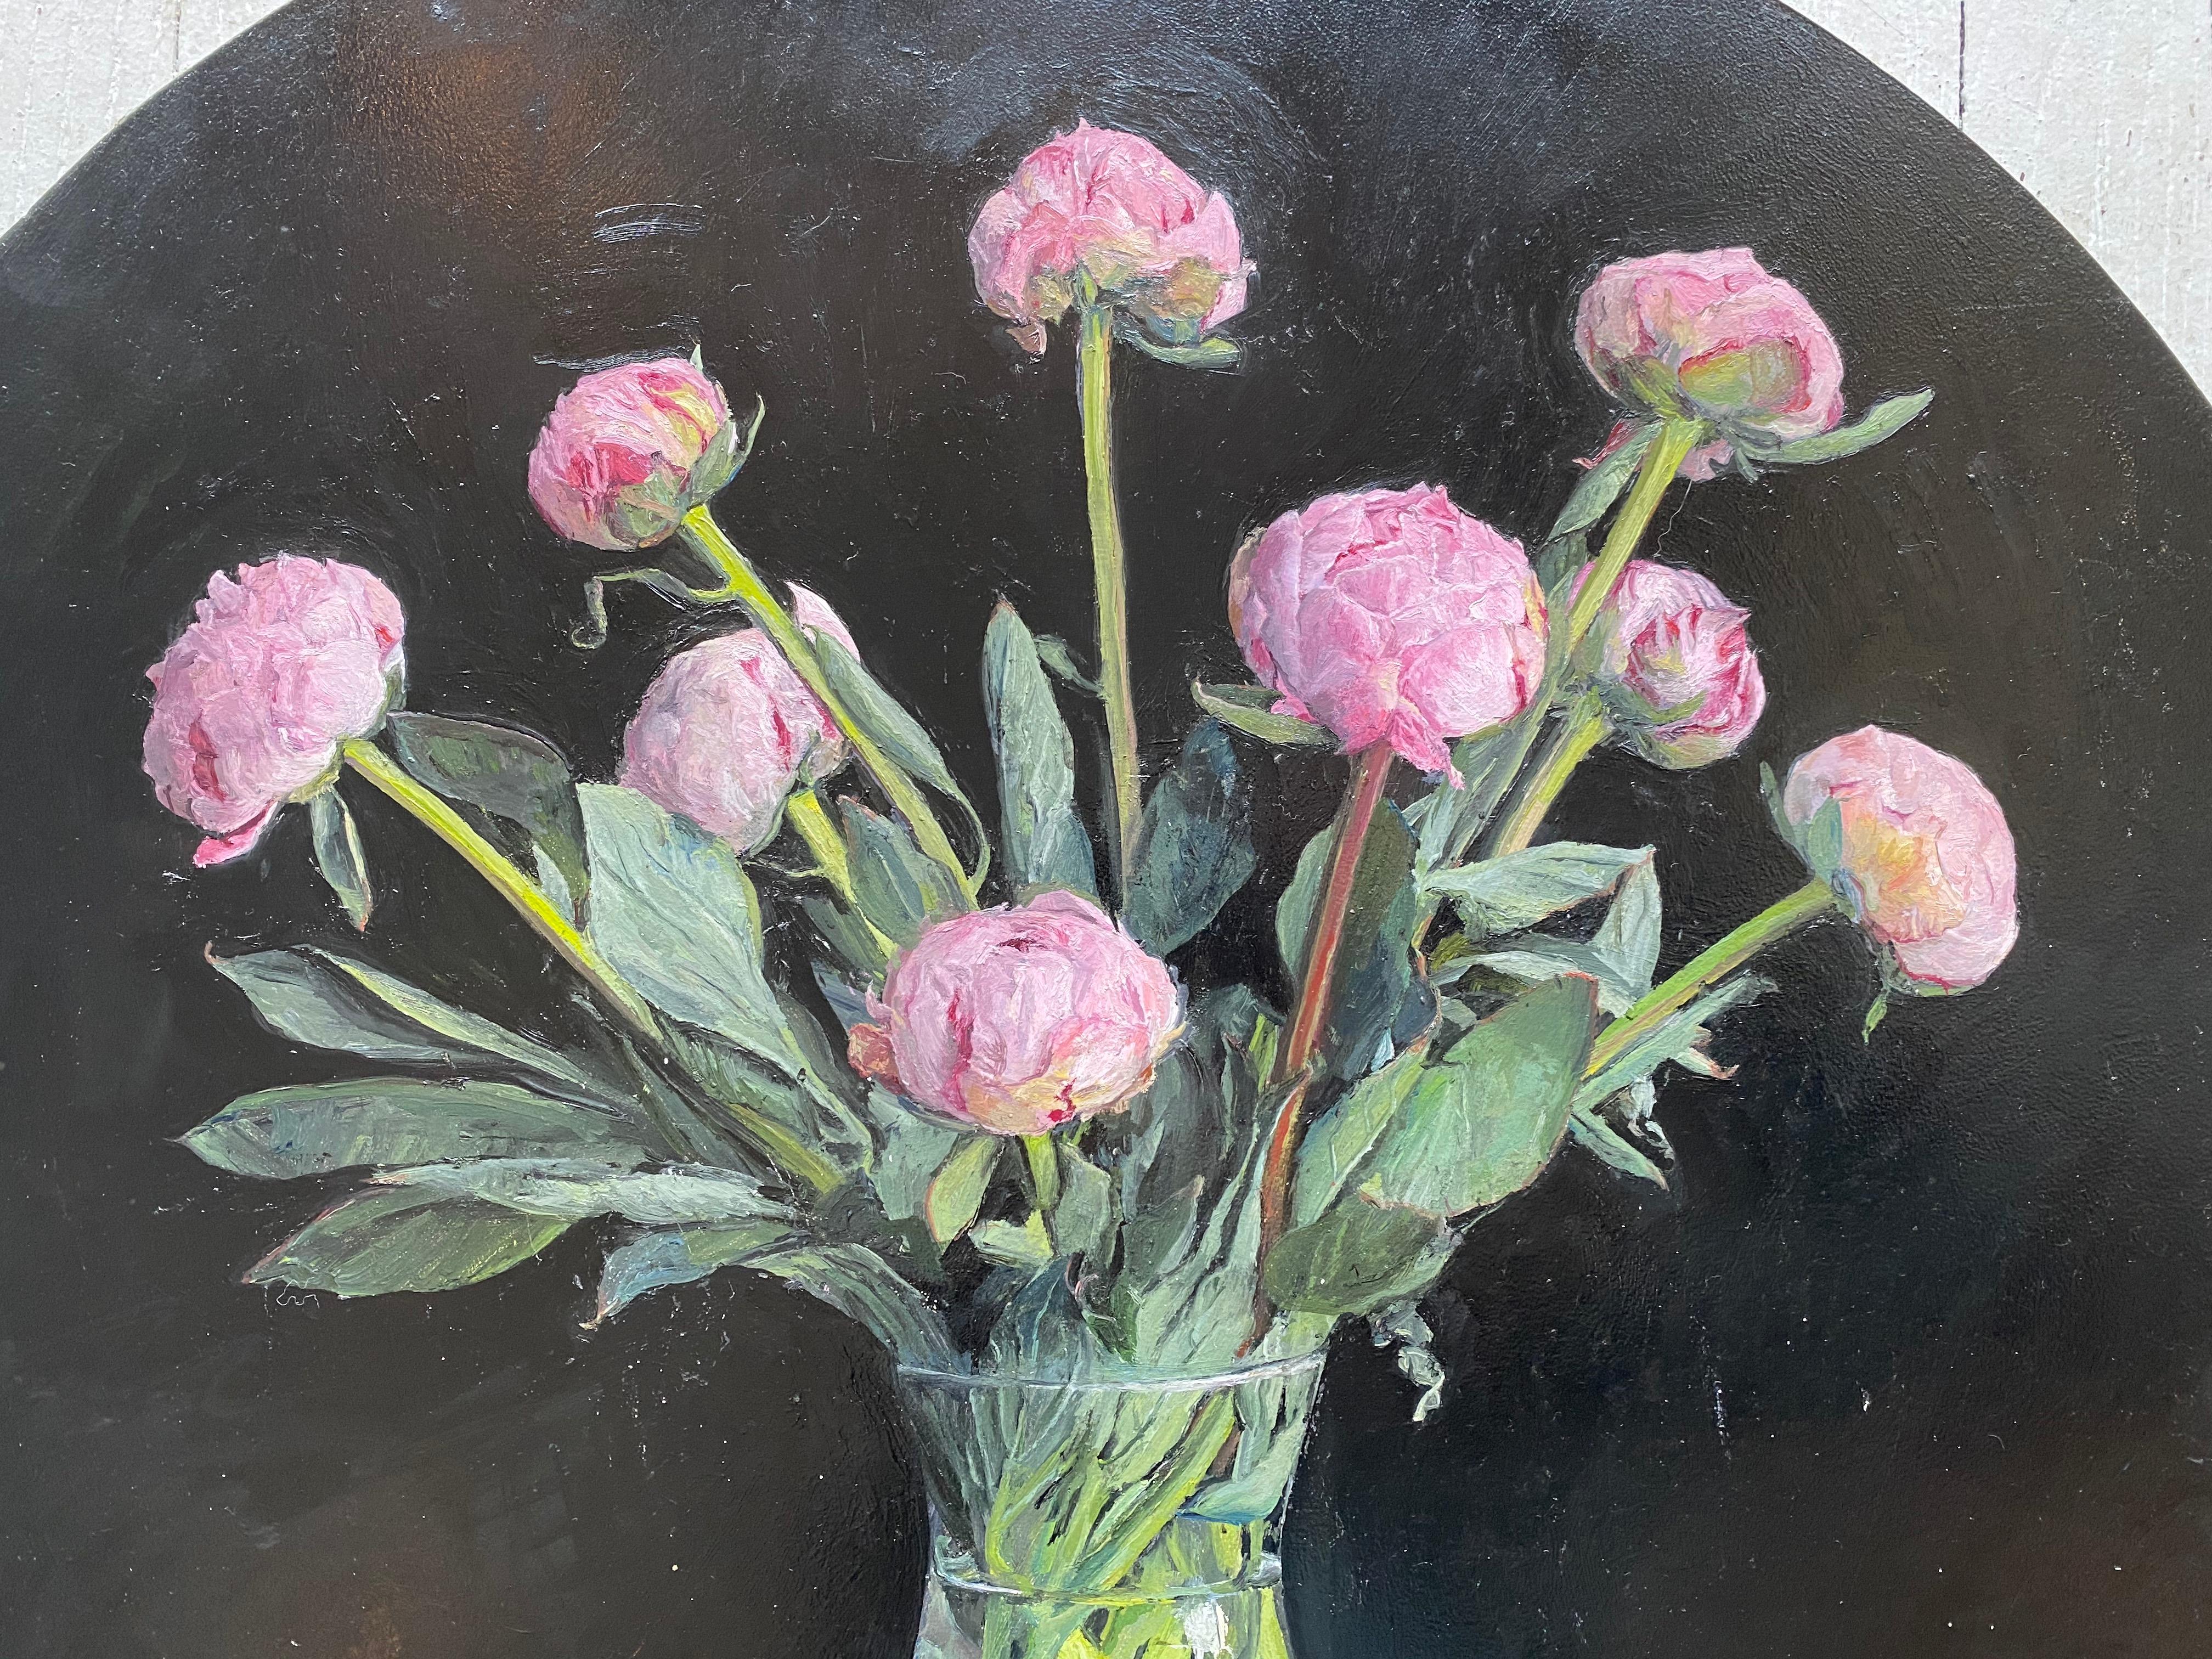 Pink Peonies was painted in the artist's studio, from direct observation. A circular aluminum panel, otherwise known as a 